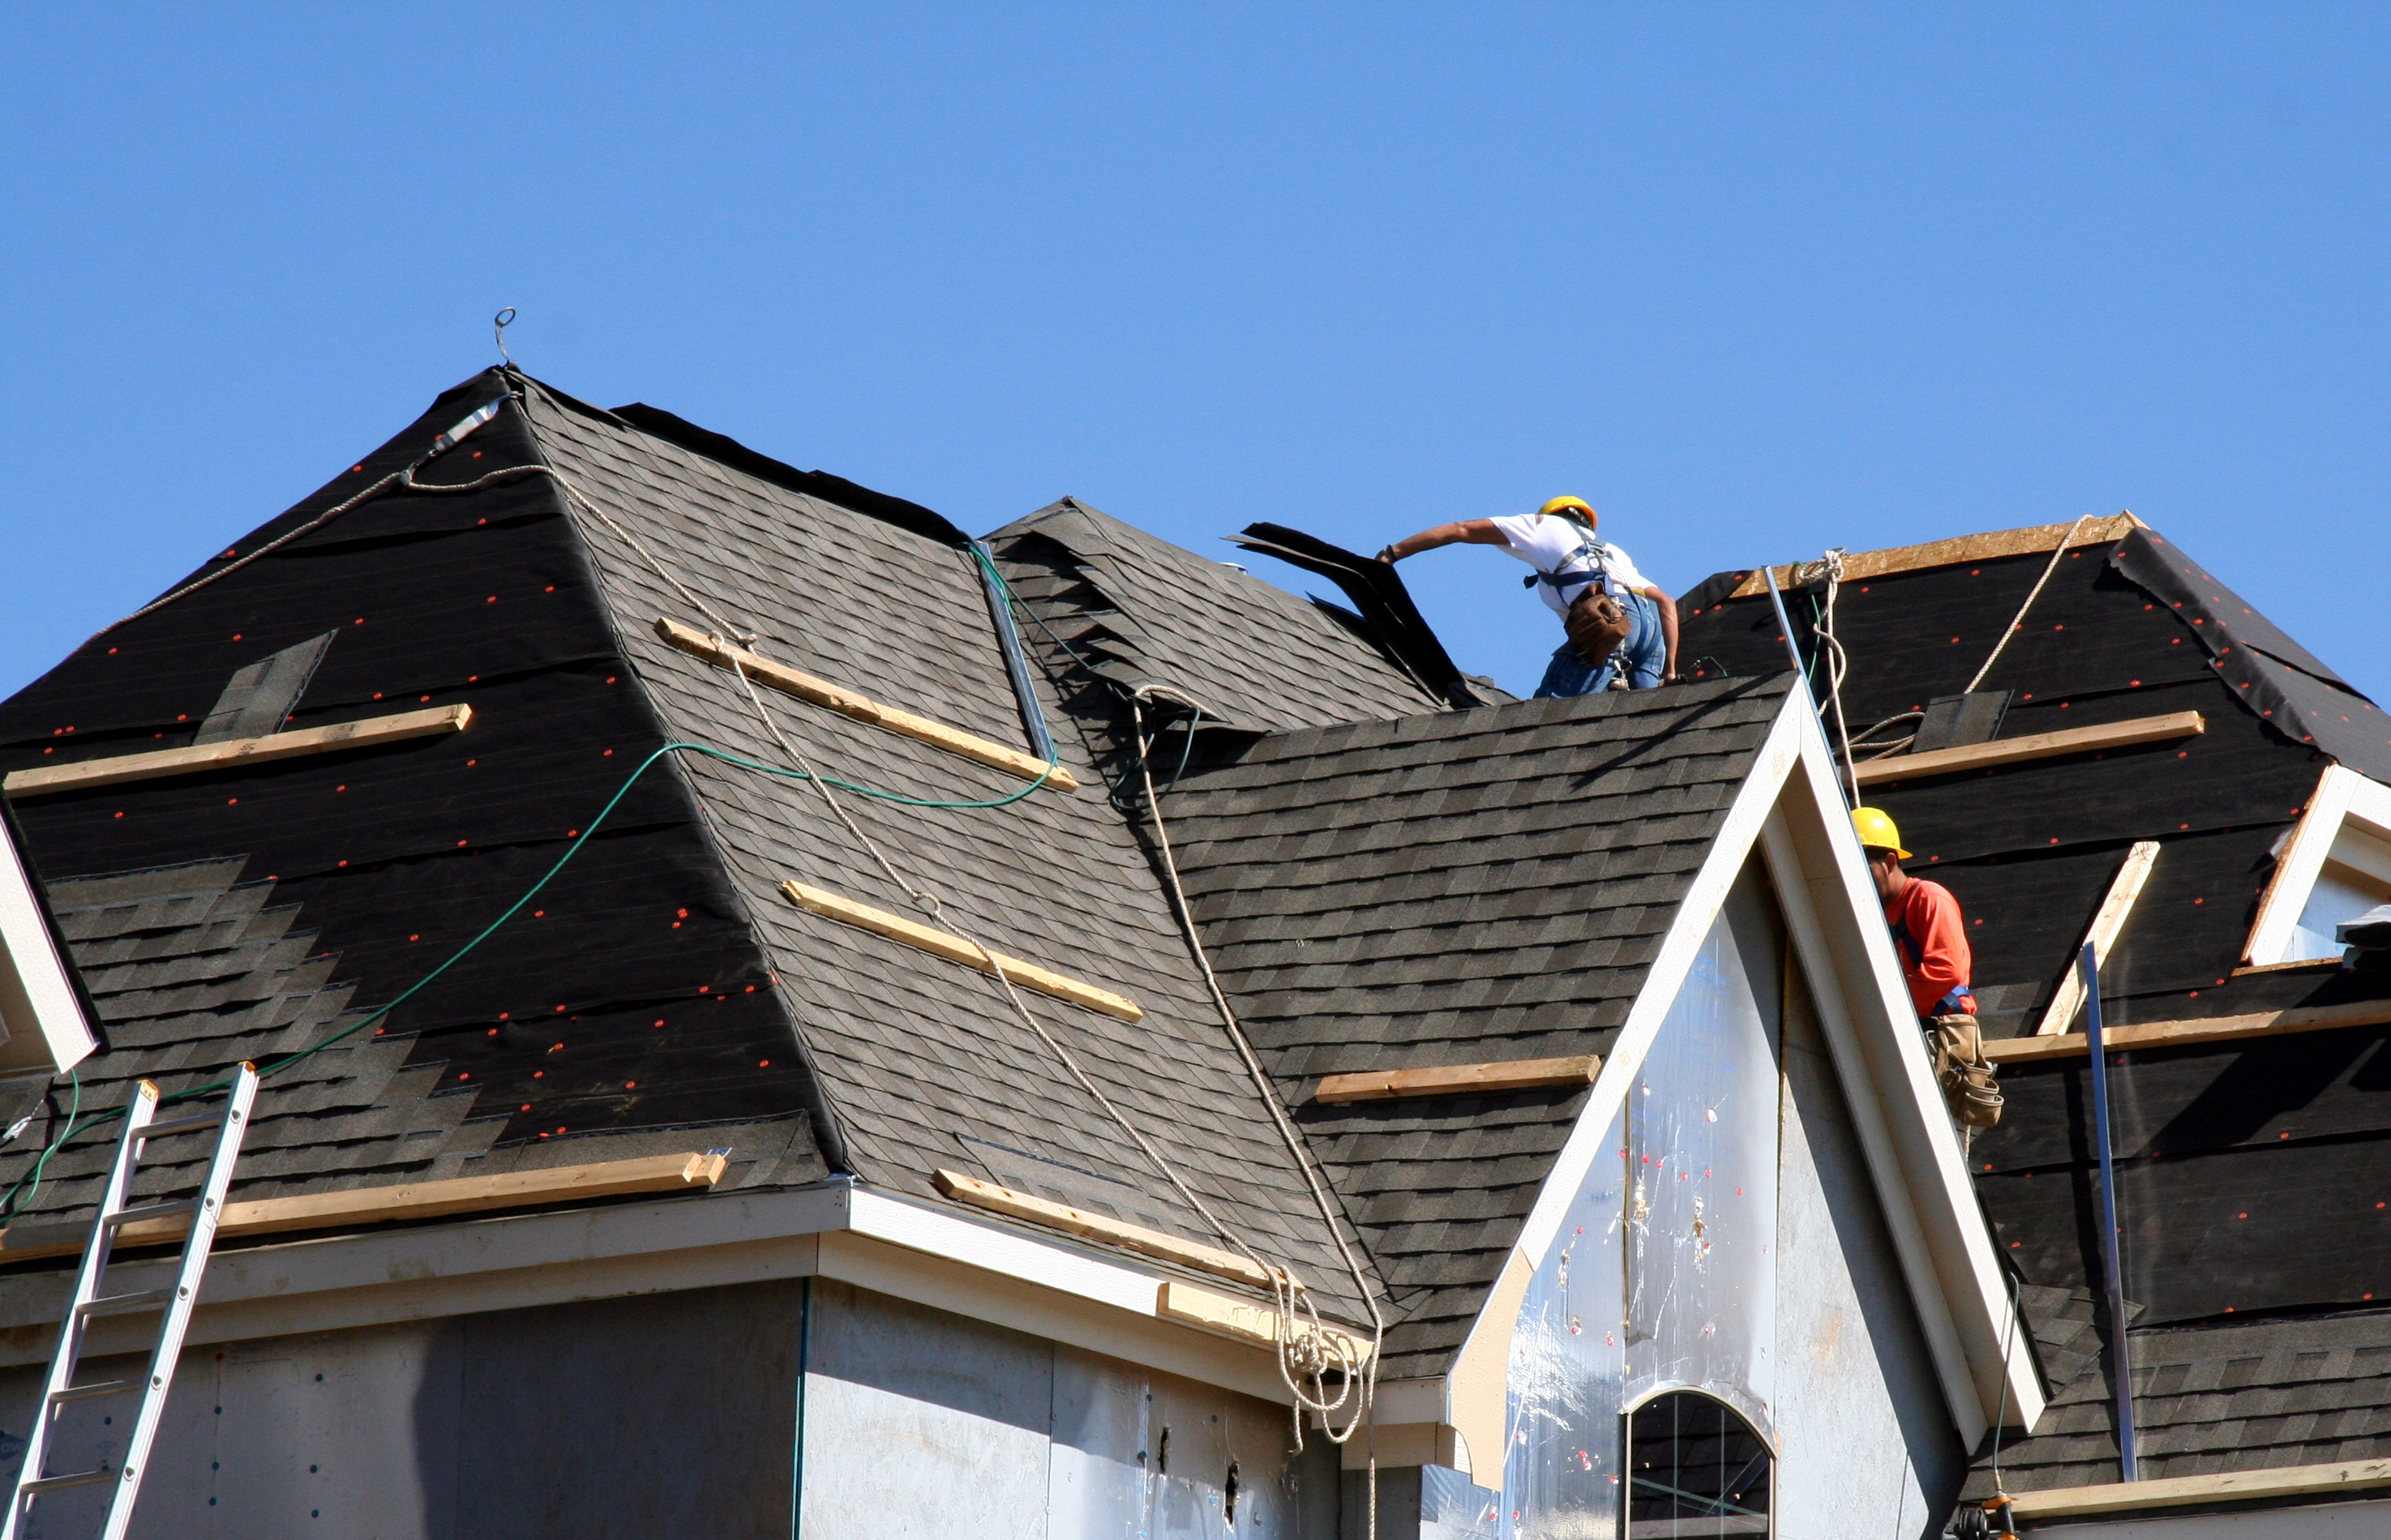 The experts at Thomas Quality Construction provide complete roof installation solutions in the greater Lexington area.